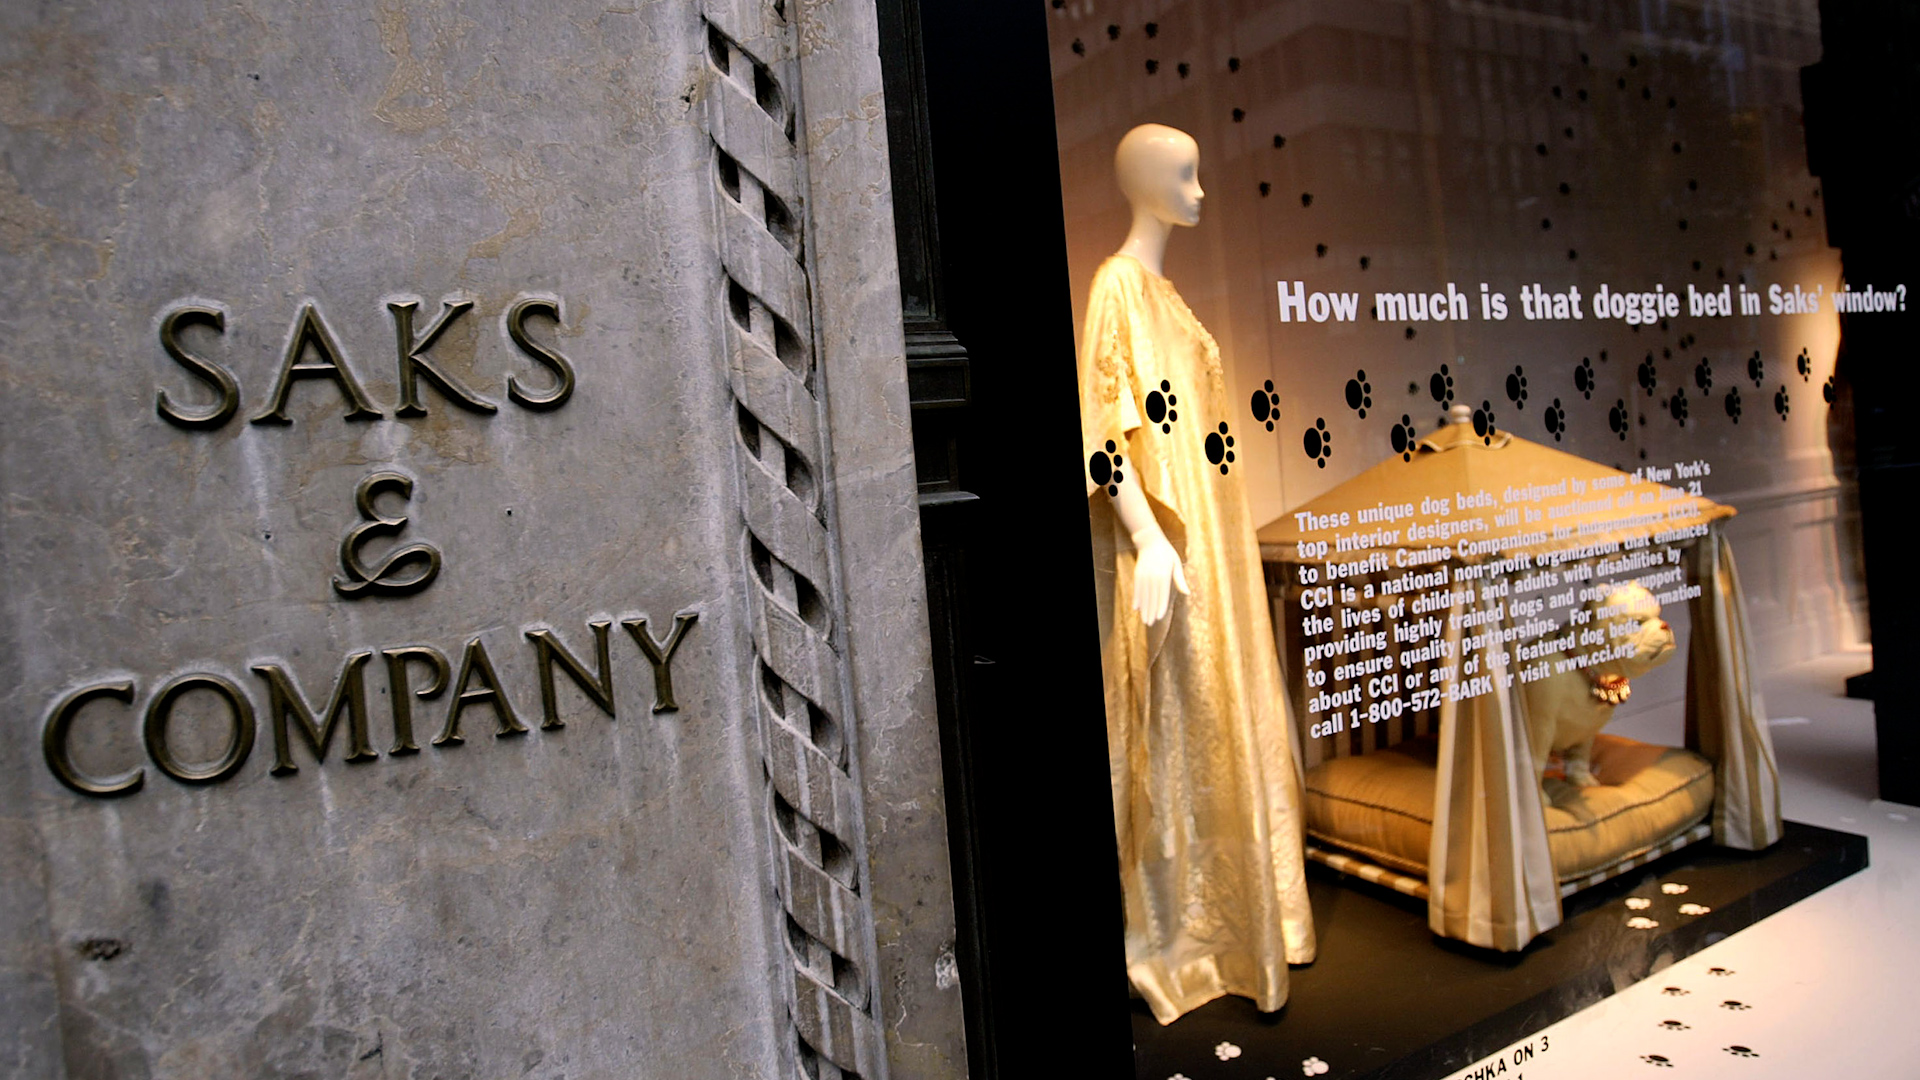 Saks Off 5th's Online Business Will Become $1 Billion Standalone